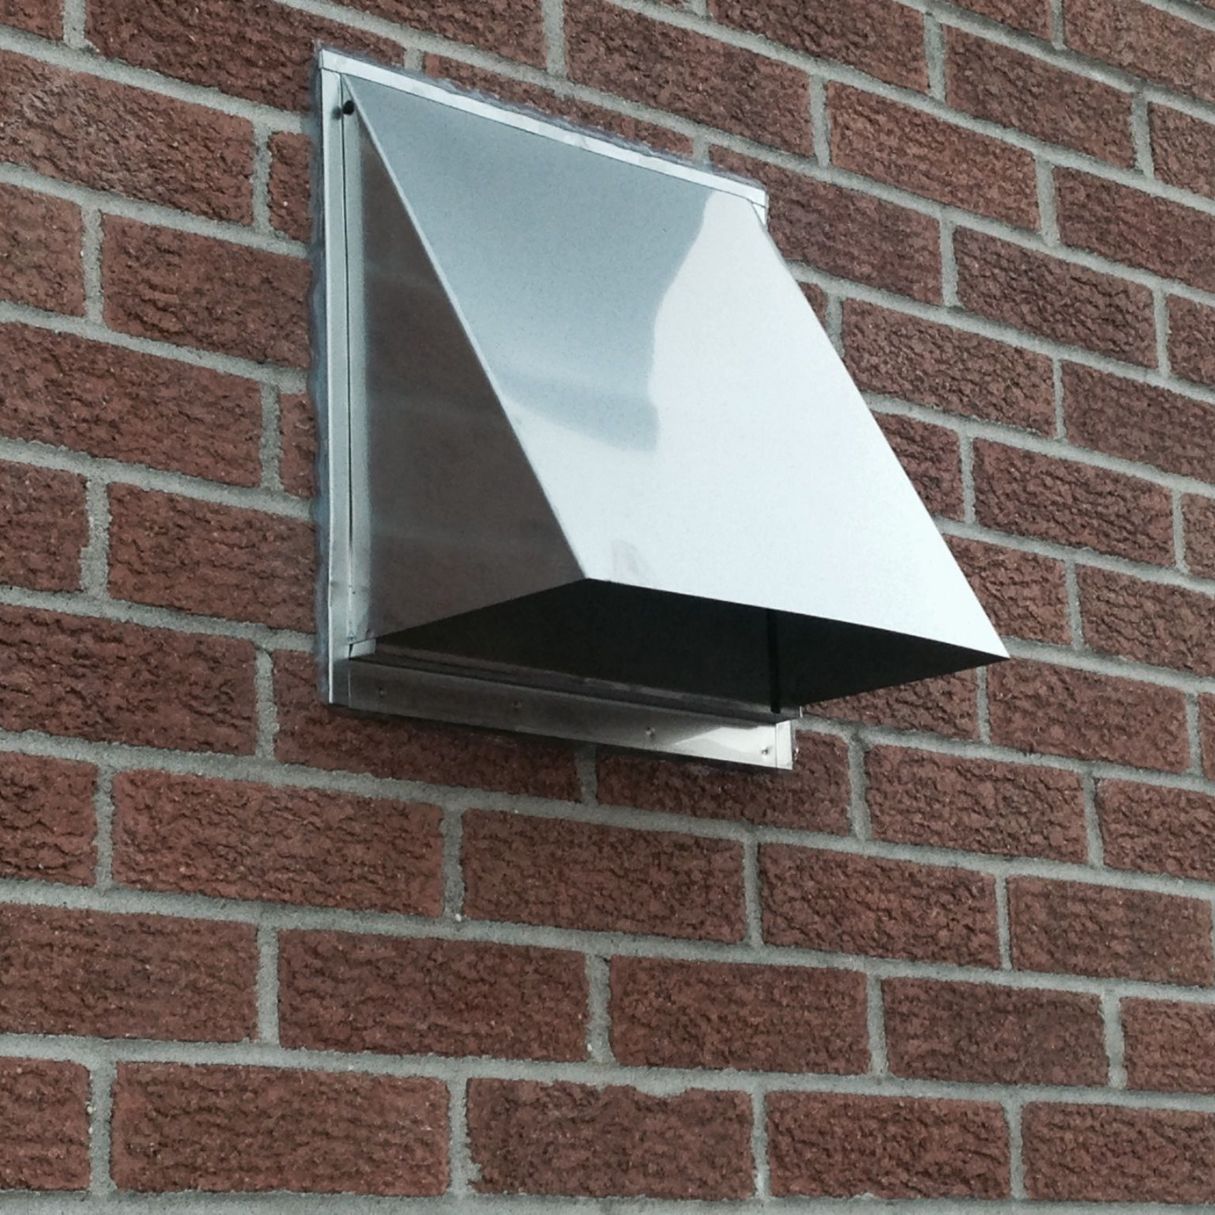 How To Install A Range Hood Vent Through The Side Wall